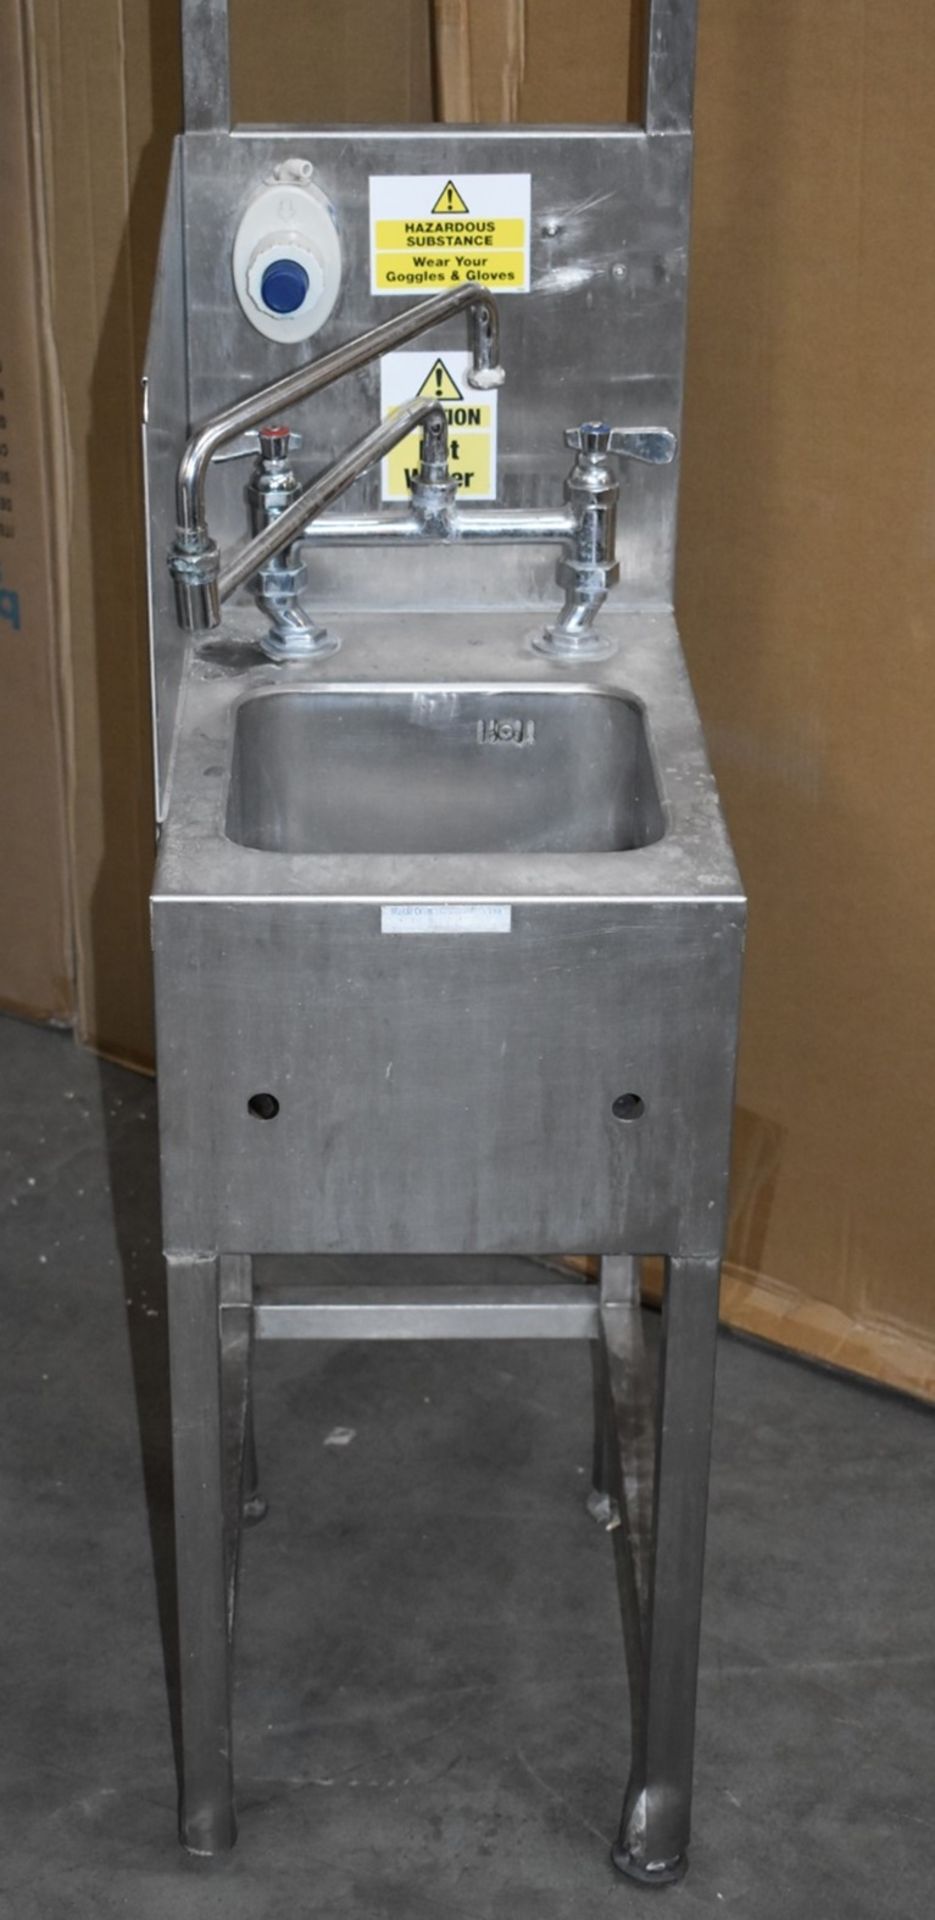 1 x Slim Janitorial Wash Station - Features Wash Bowl, Mop Hanger, Goggle Hook, Detergent Pump & Tap - Image 3 of 5